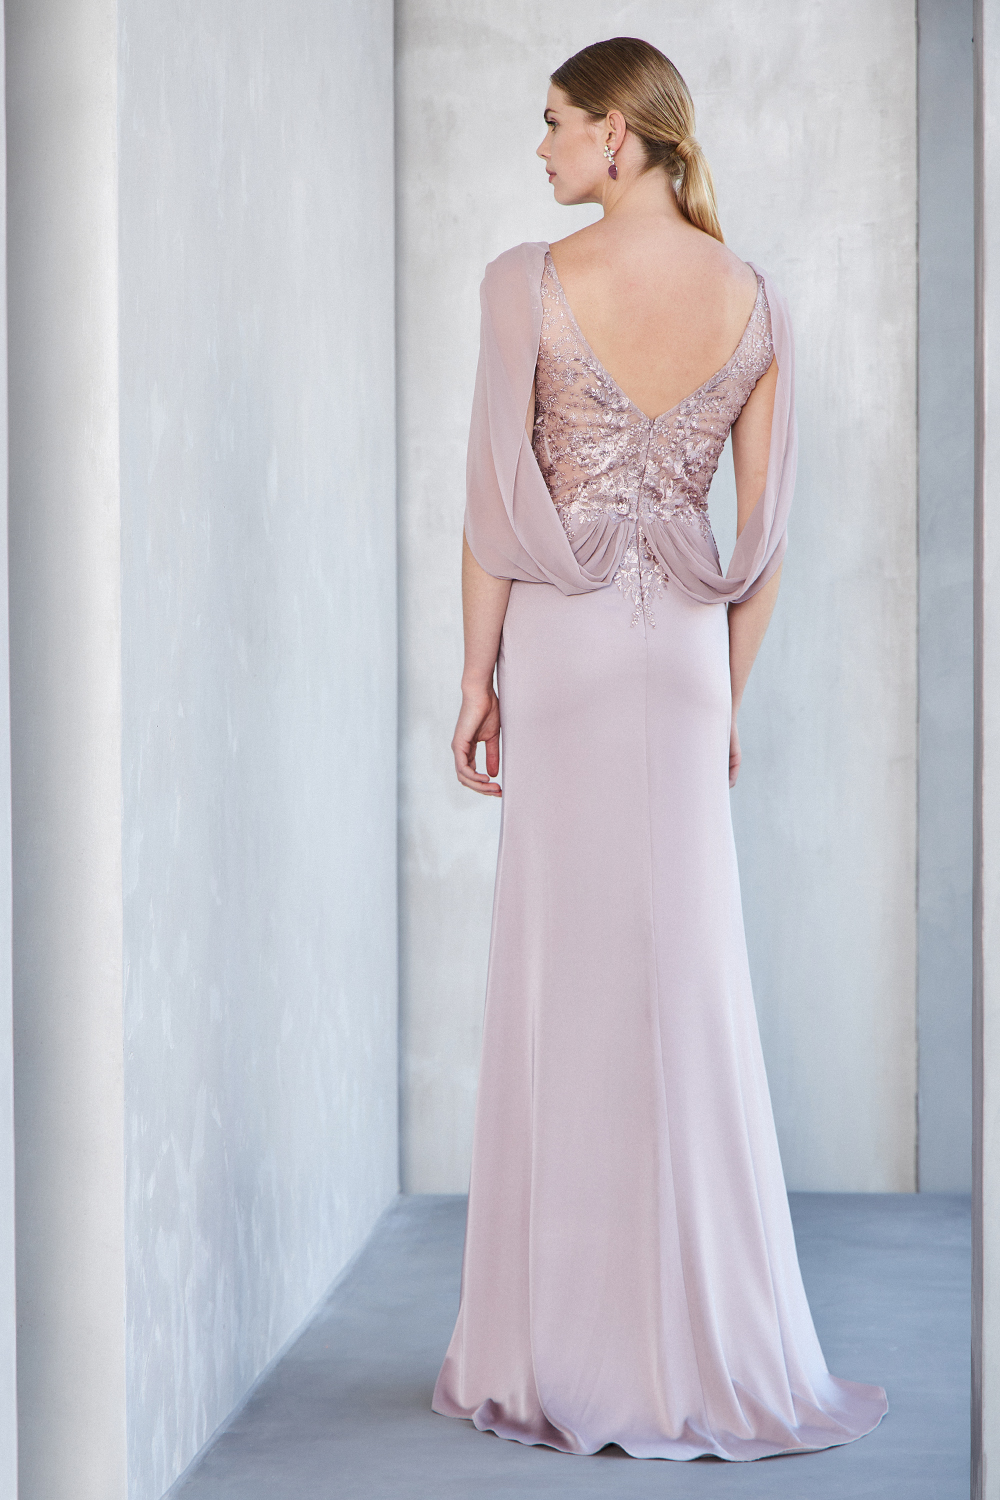 Классические платья / Long evening satin beaded dress with lace top and long sleeves with chiffon